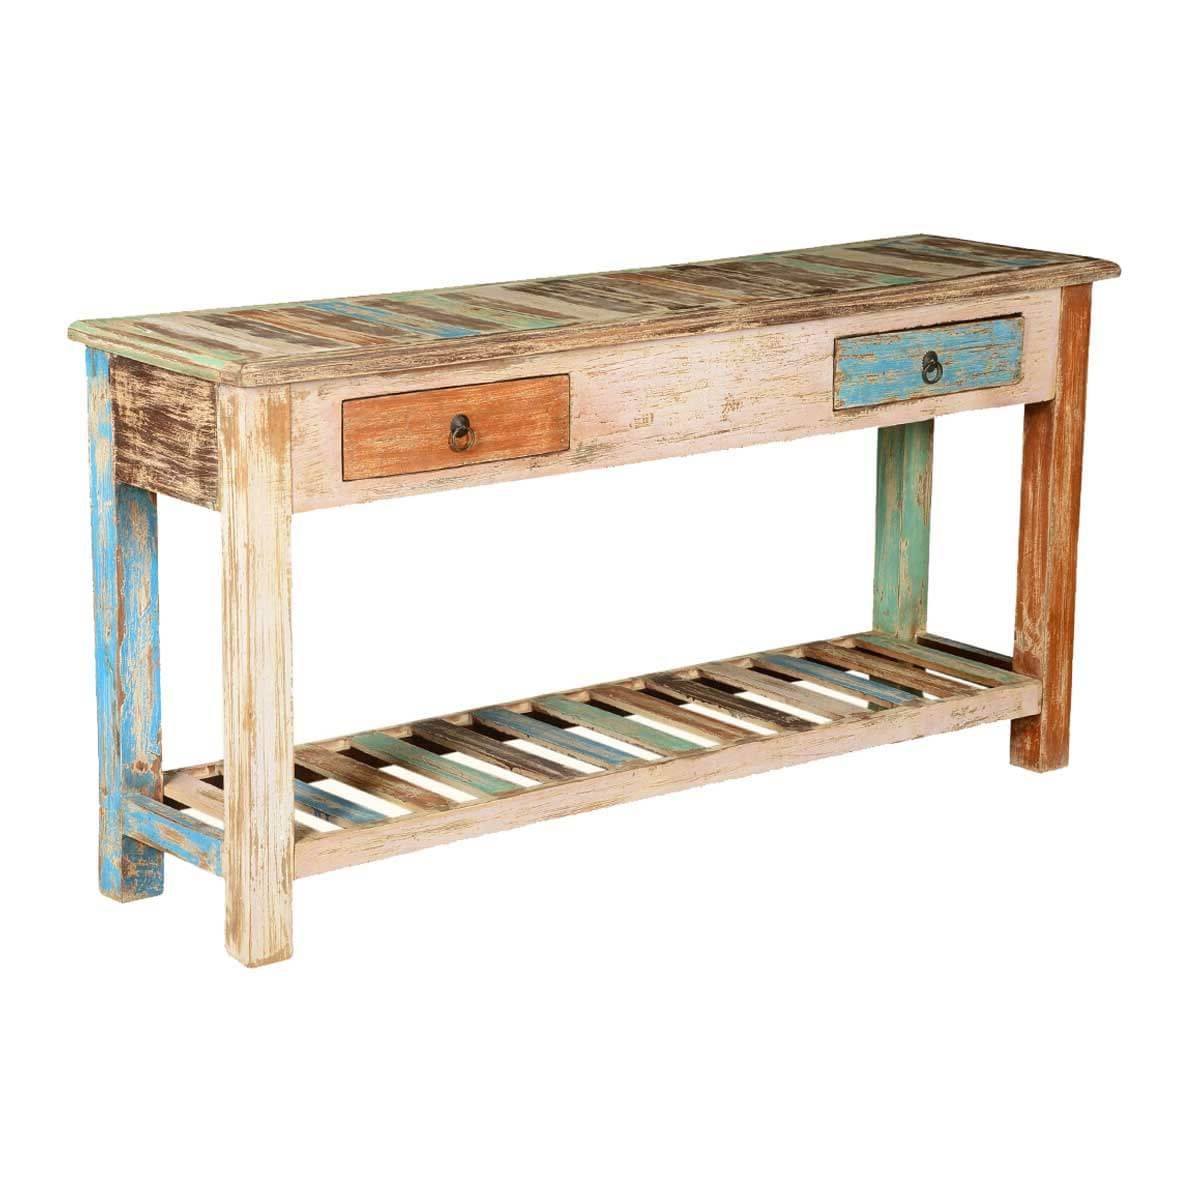 Rustic Colors Mango Wood 59" Hall Console Table W Drawers Intended For Well Known Rustic Walnut Wood Console Tables (View 10 of 10)